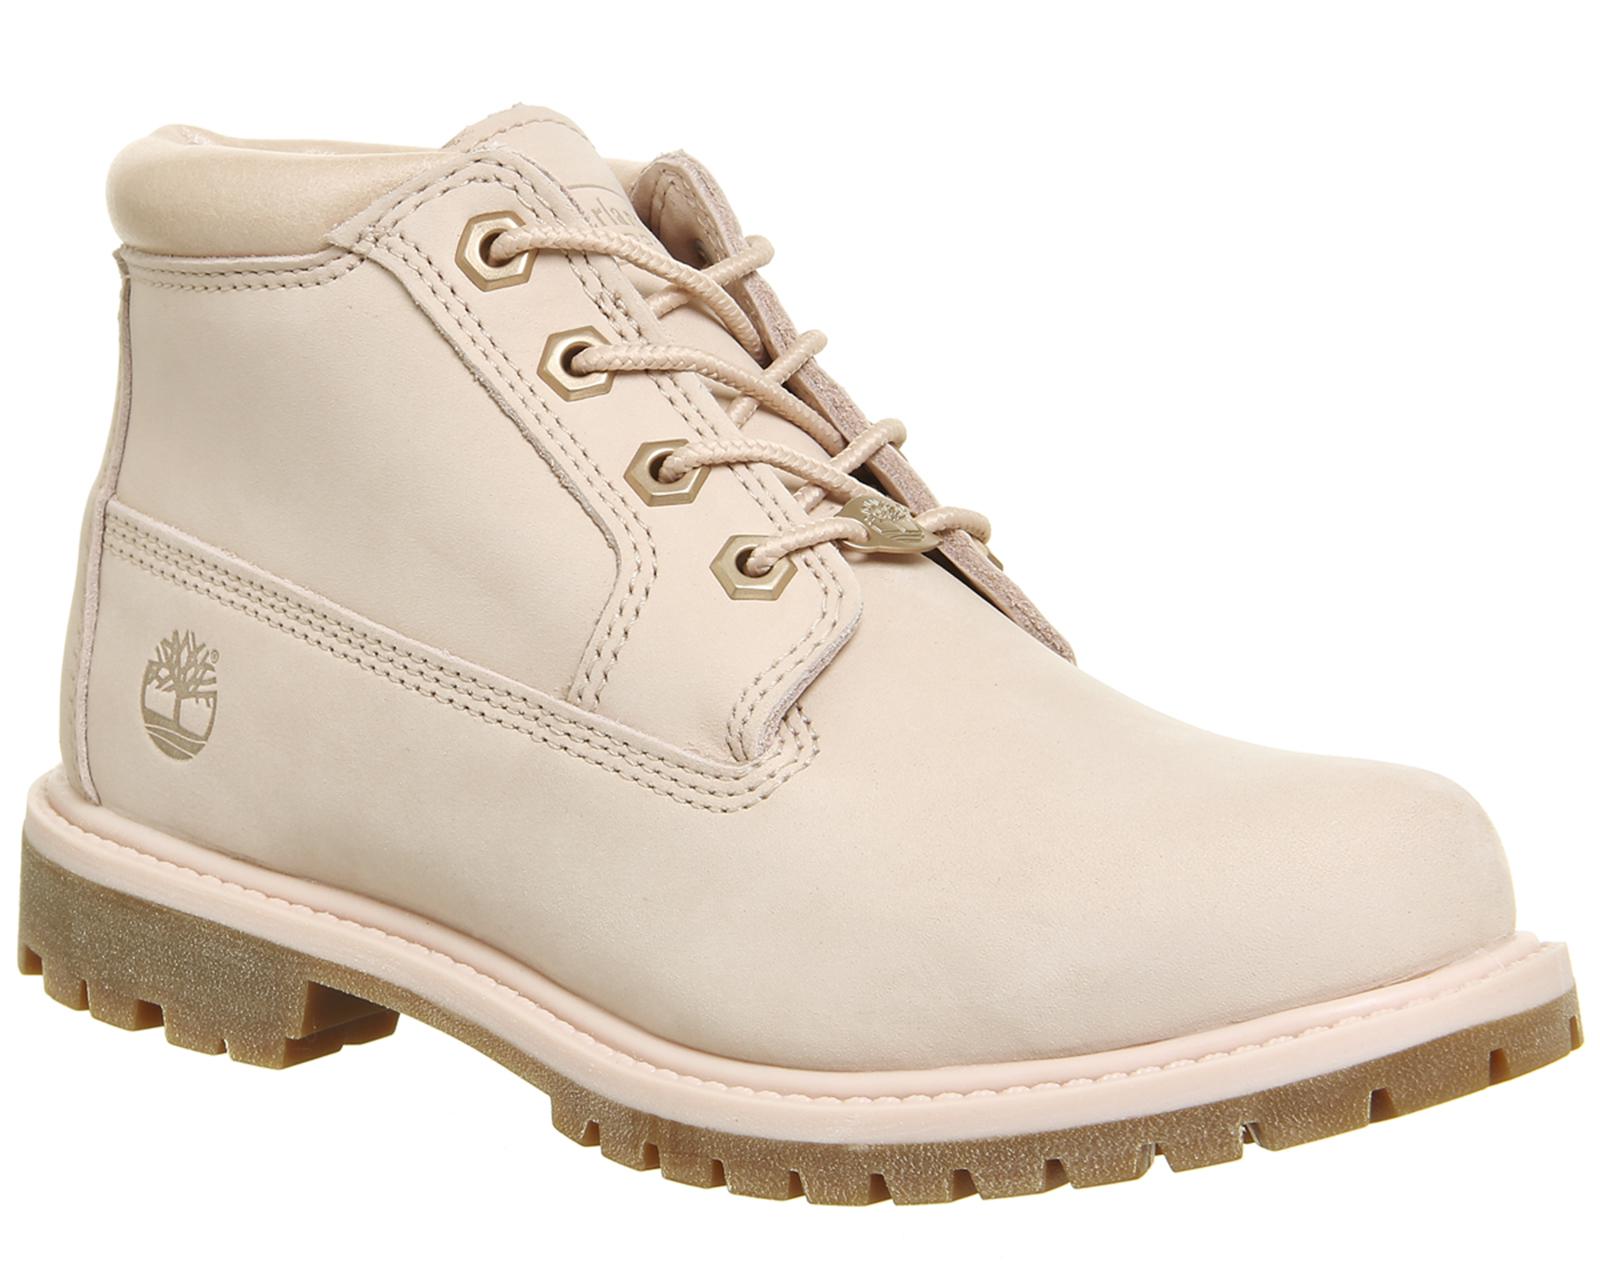 Lyst - Timberland Nellie Chukka Double Waterproof Boots in Natural ...